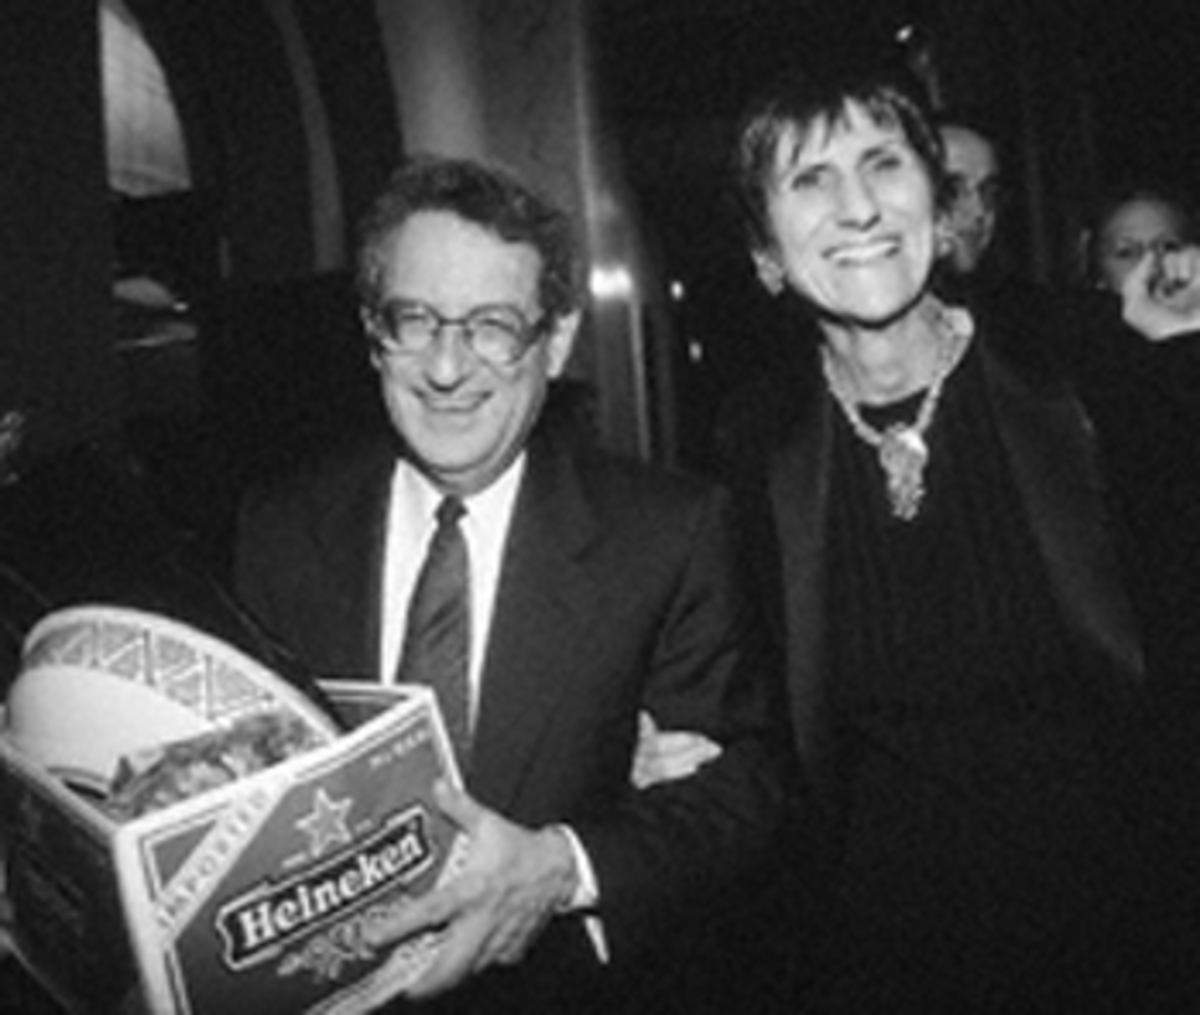 Democratic Pollster Stan Greenberg with wife Rep. Rosa DeLauro (D-CT)